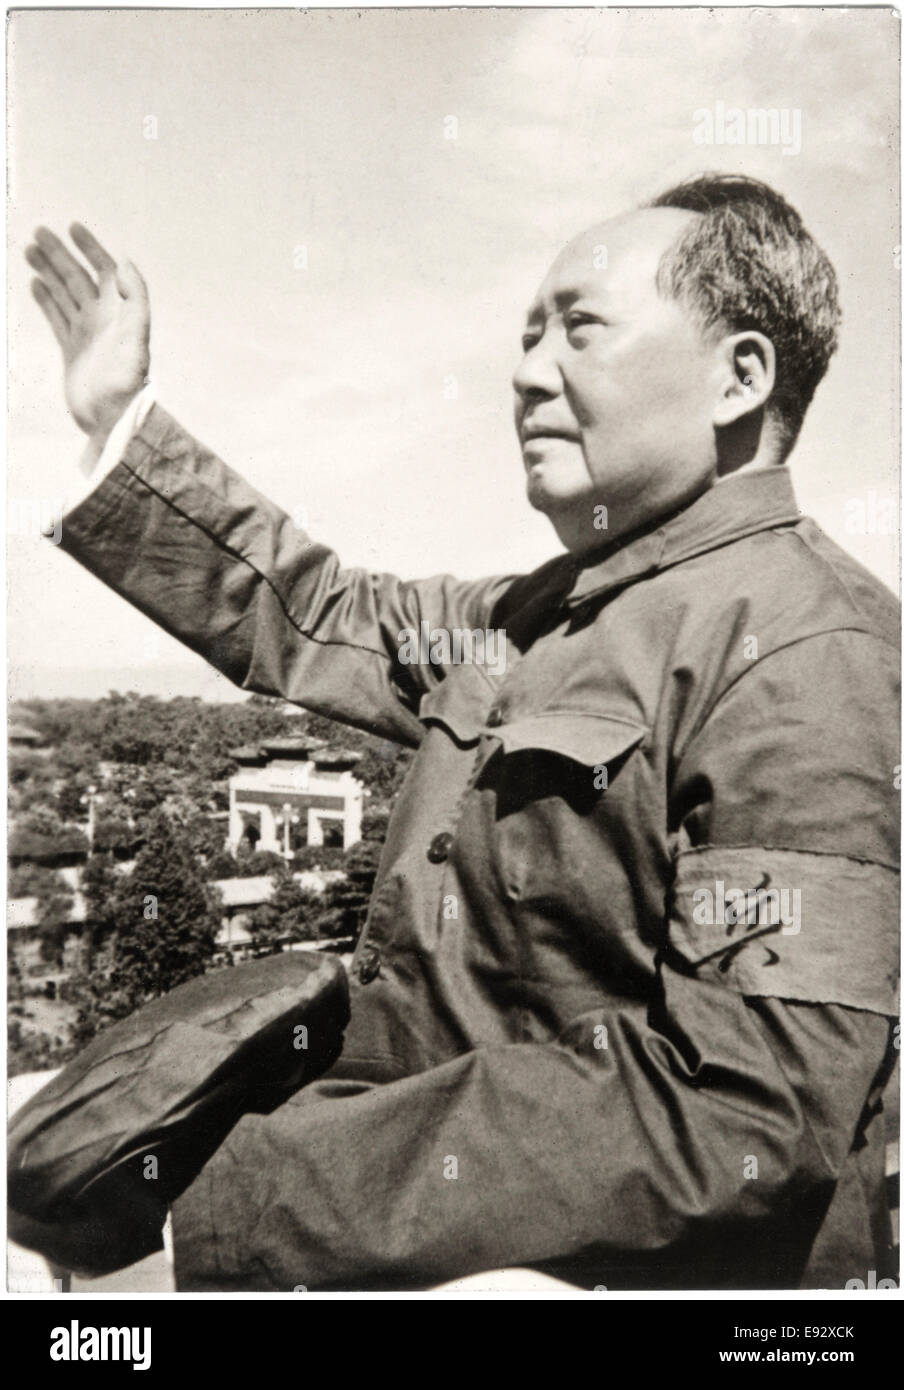 Chairman Mao Zedong (1893-1976), Founder of the People's Republic of China, Portrait Waving to Crowd, 1963 Stock Photo